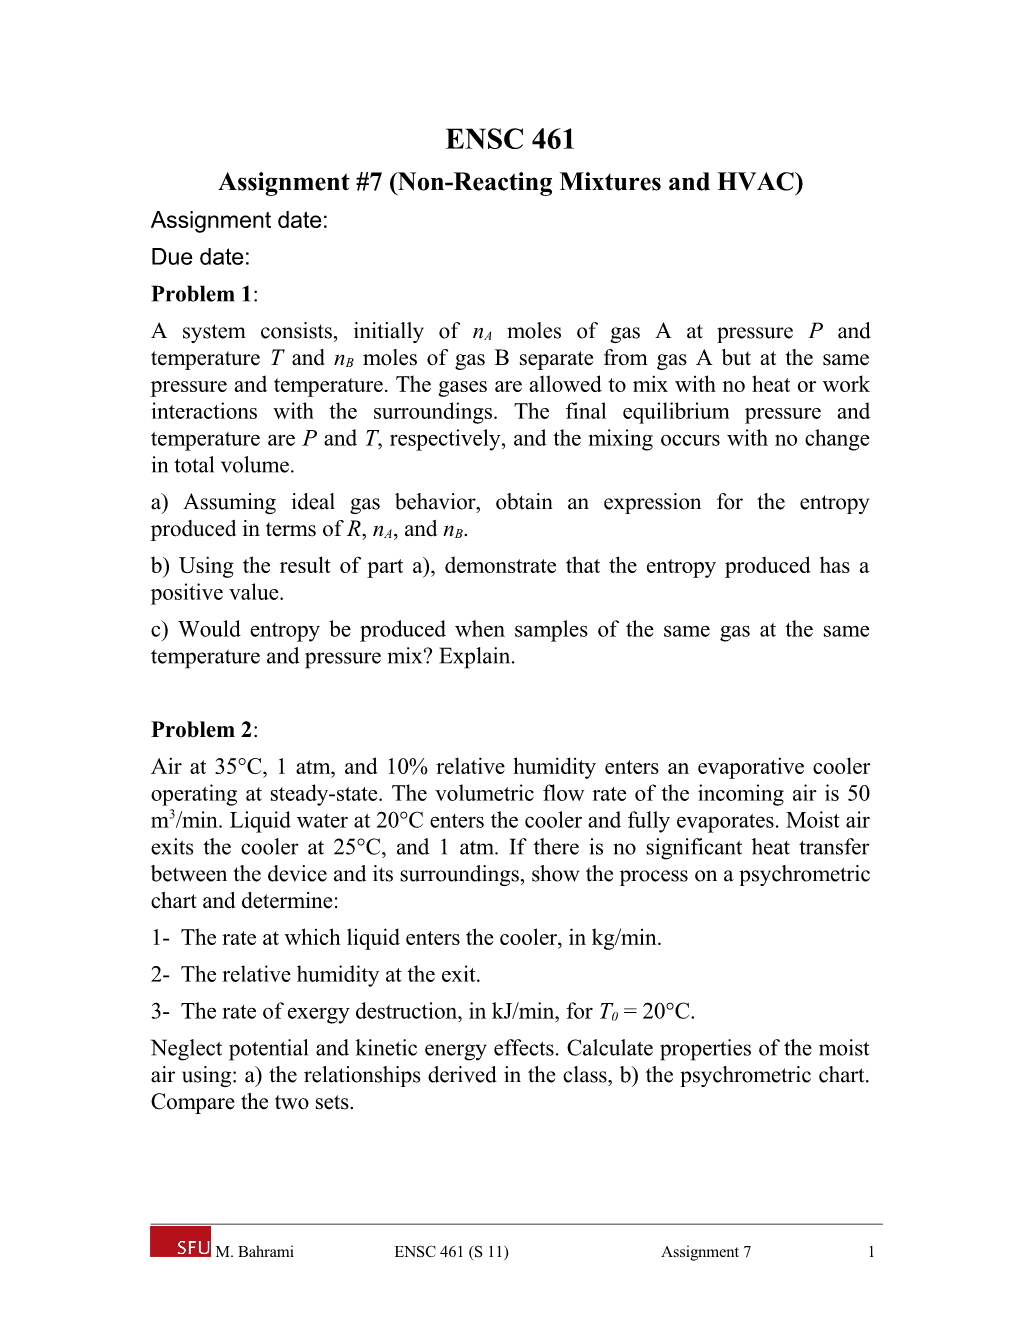 Assignment #7(Non-Reacting Mixtures and HVAC)